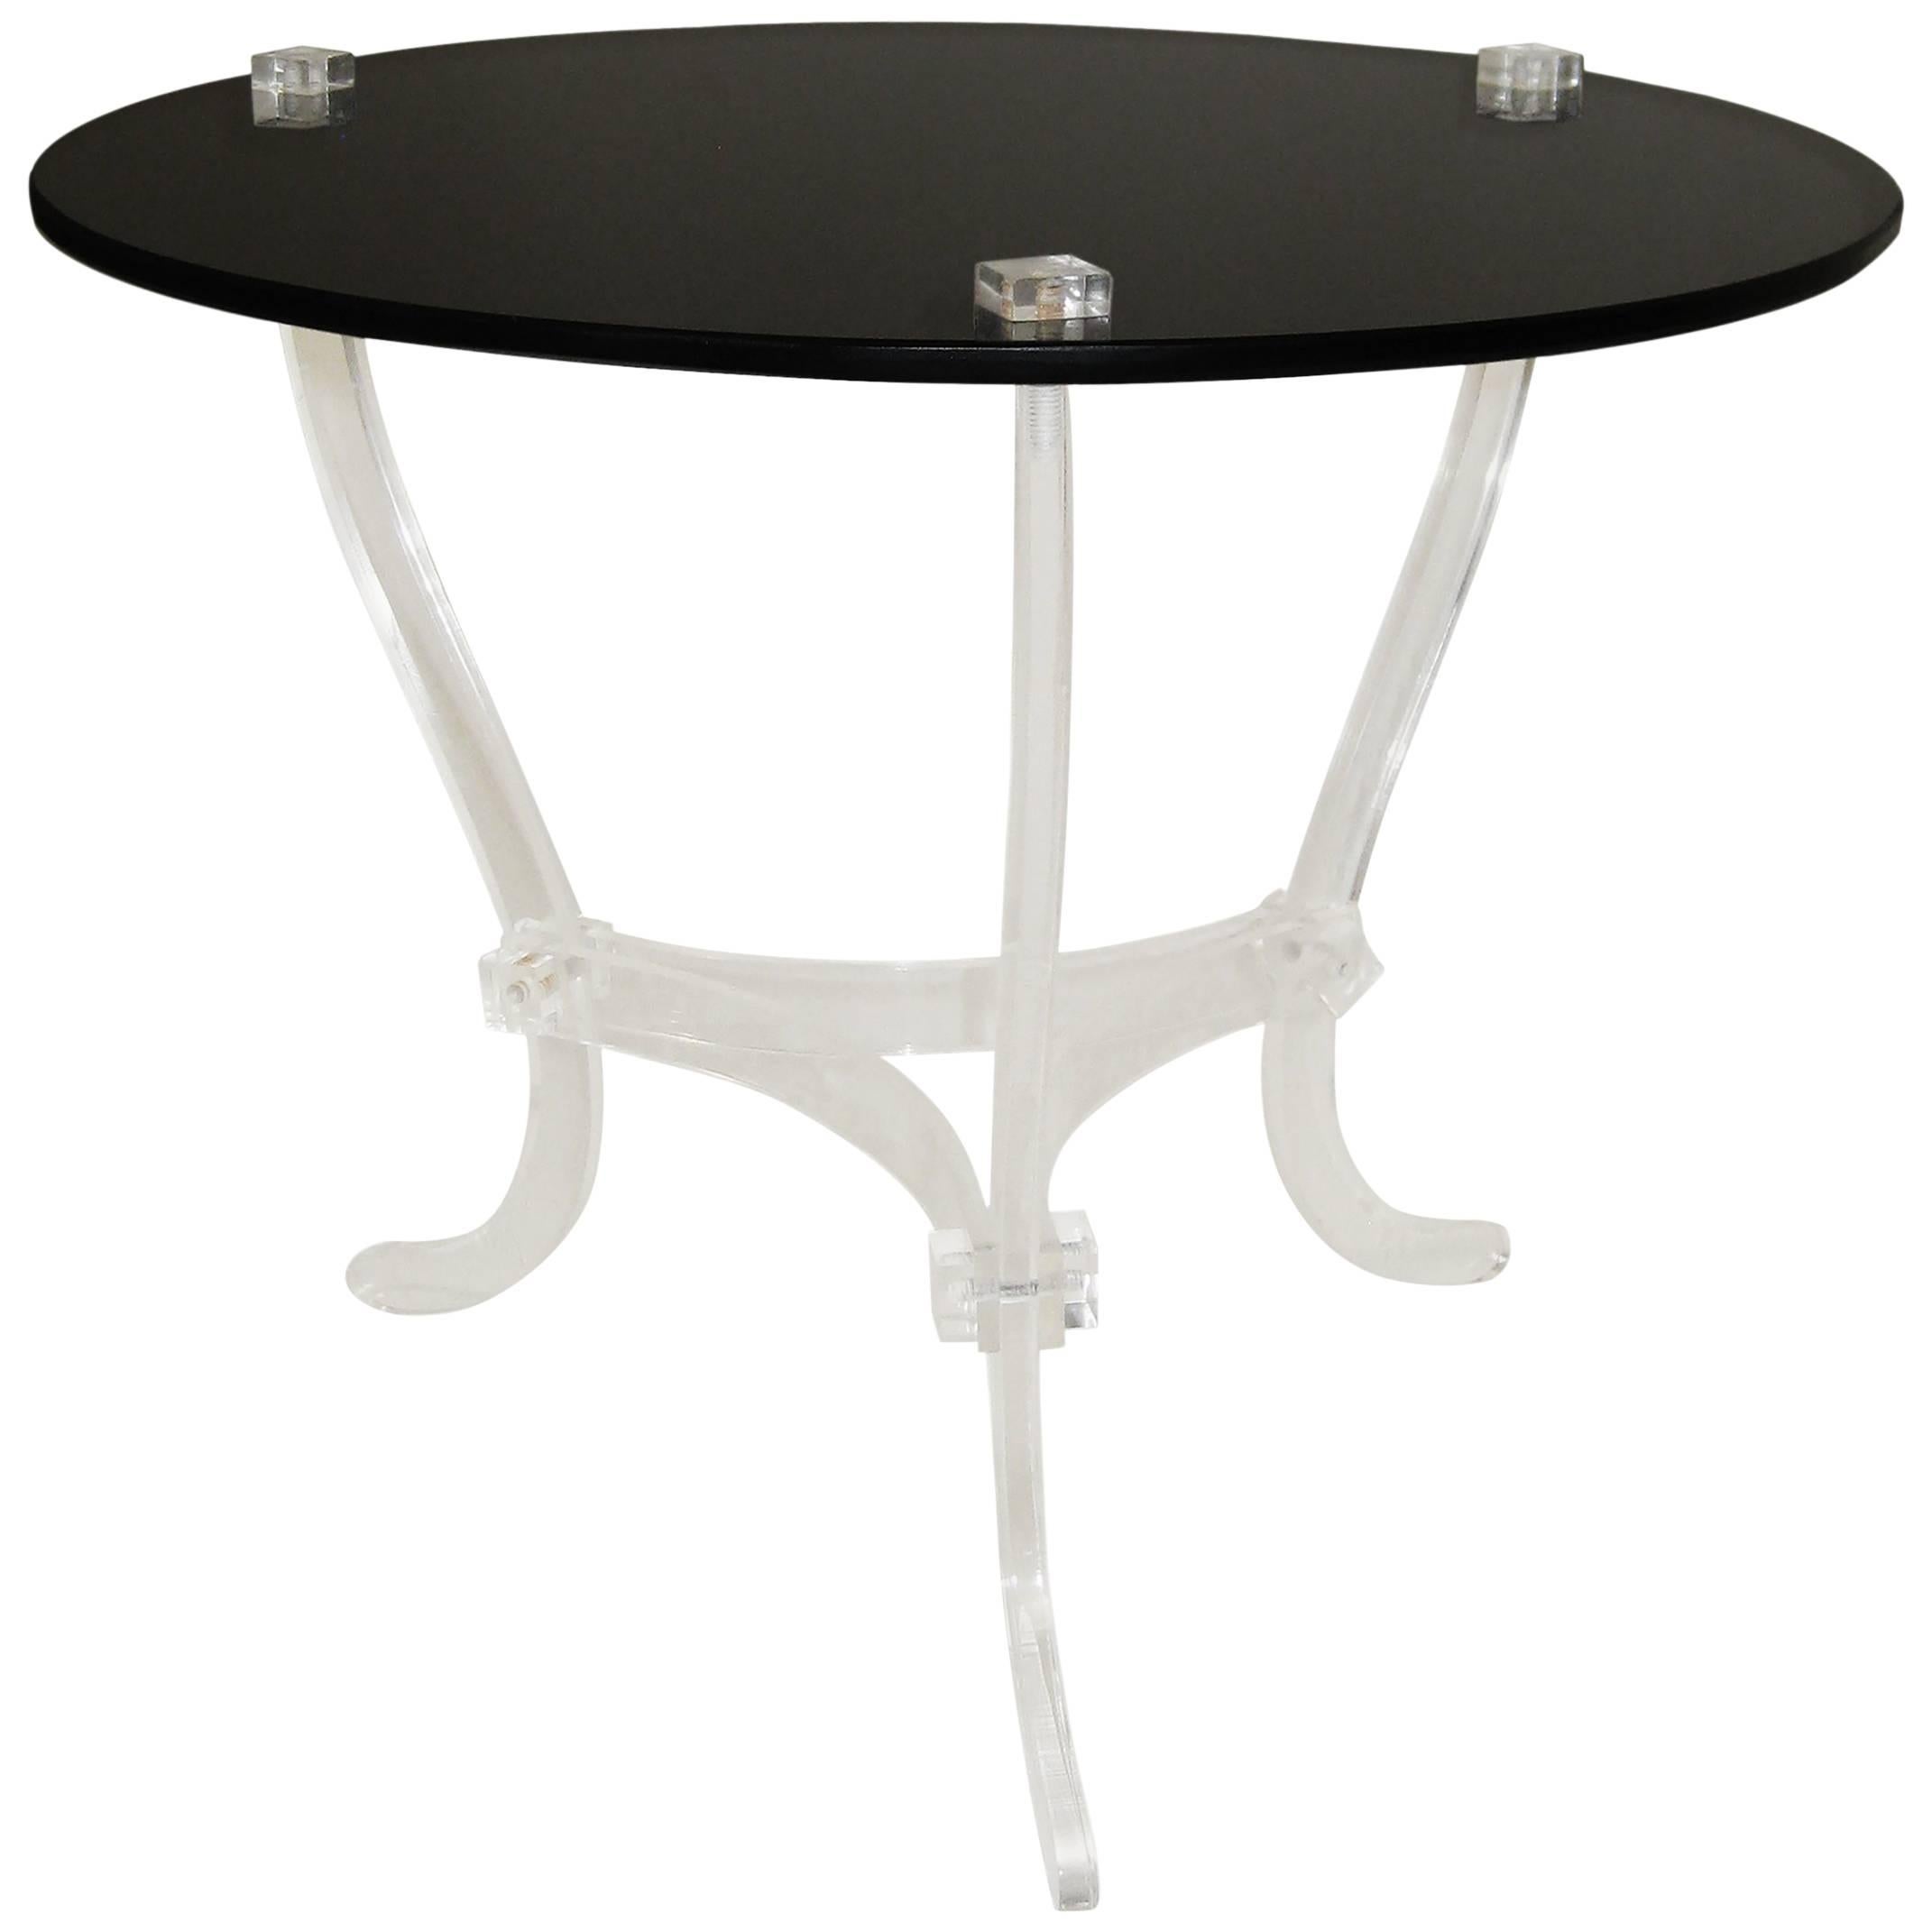 Midcentury Occasional Table, Lucite and Black Vitrolite, Mexico, circa 1965 For Sale